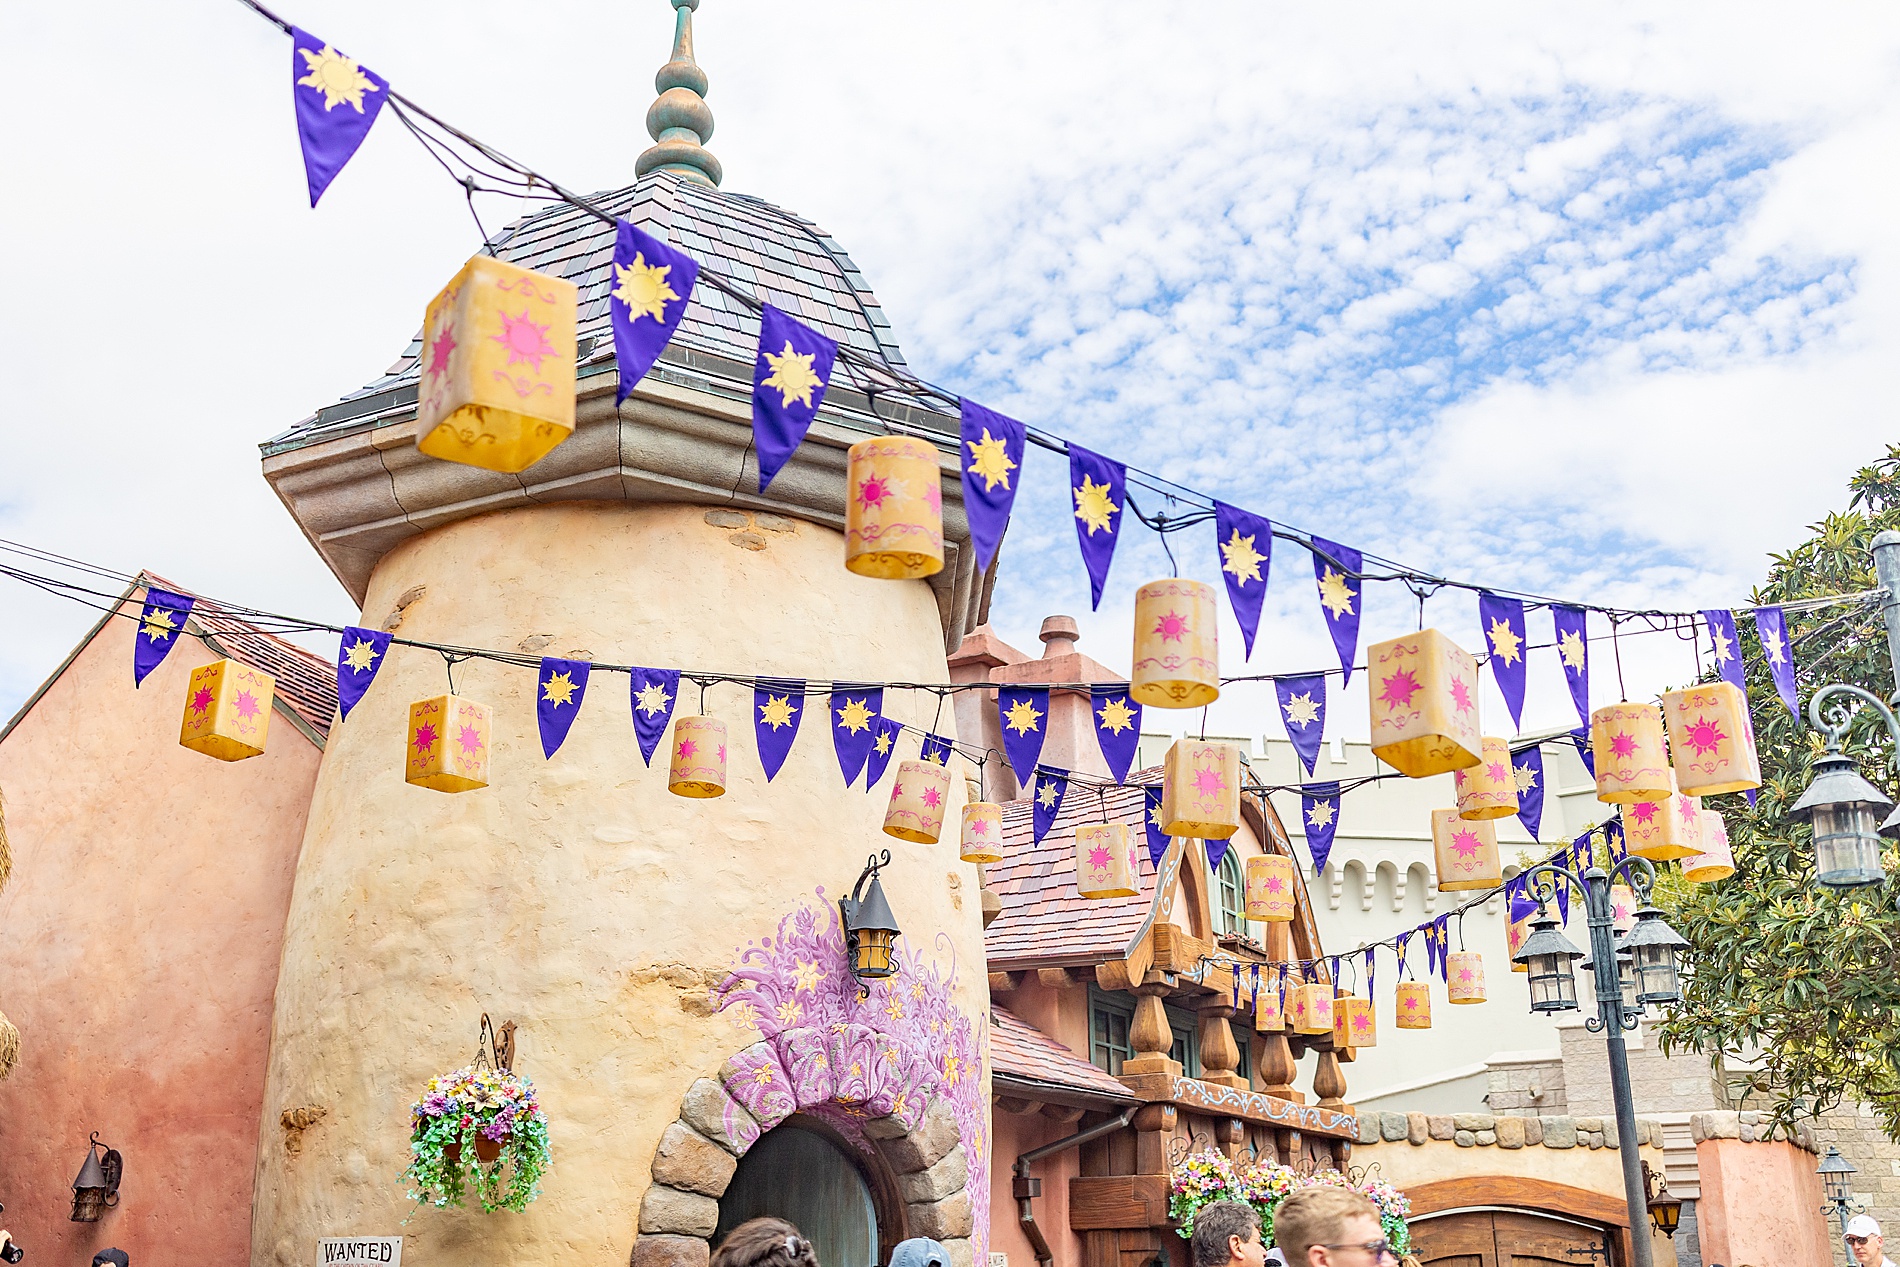 Tangled themed building and lanterns 